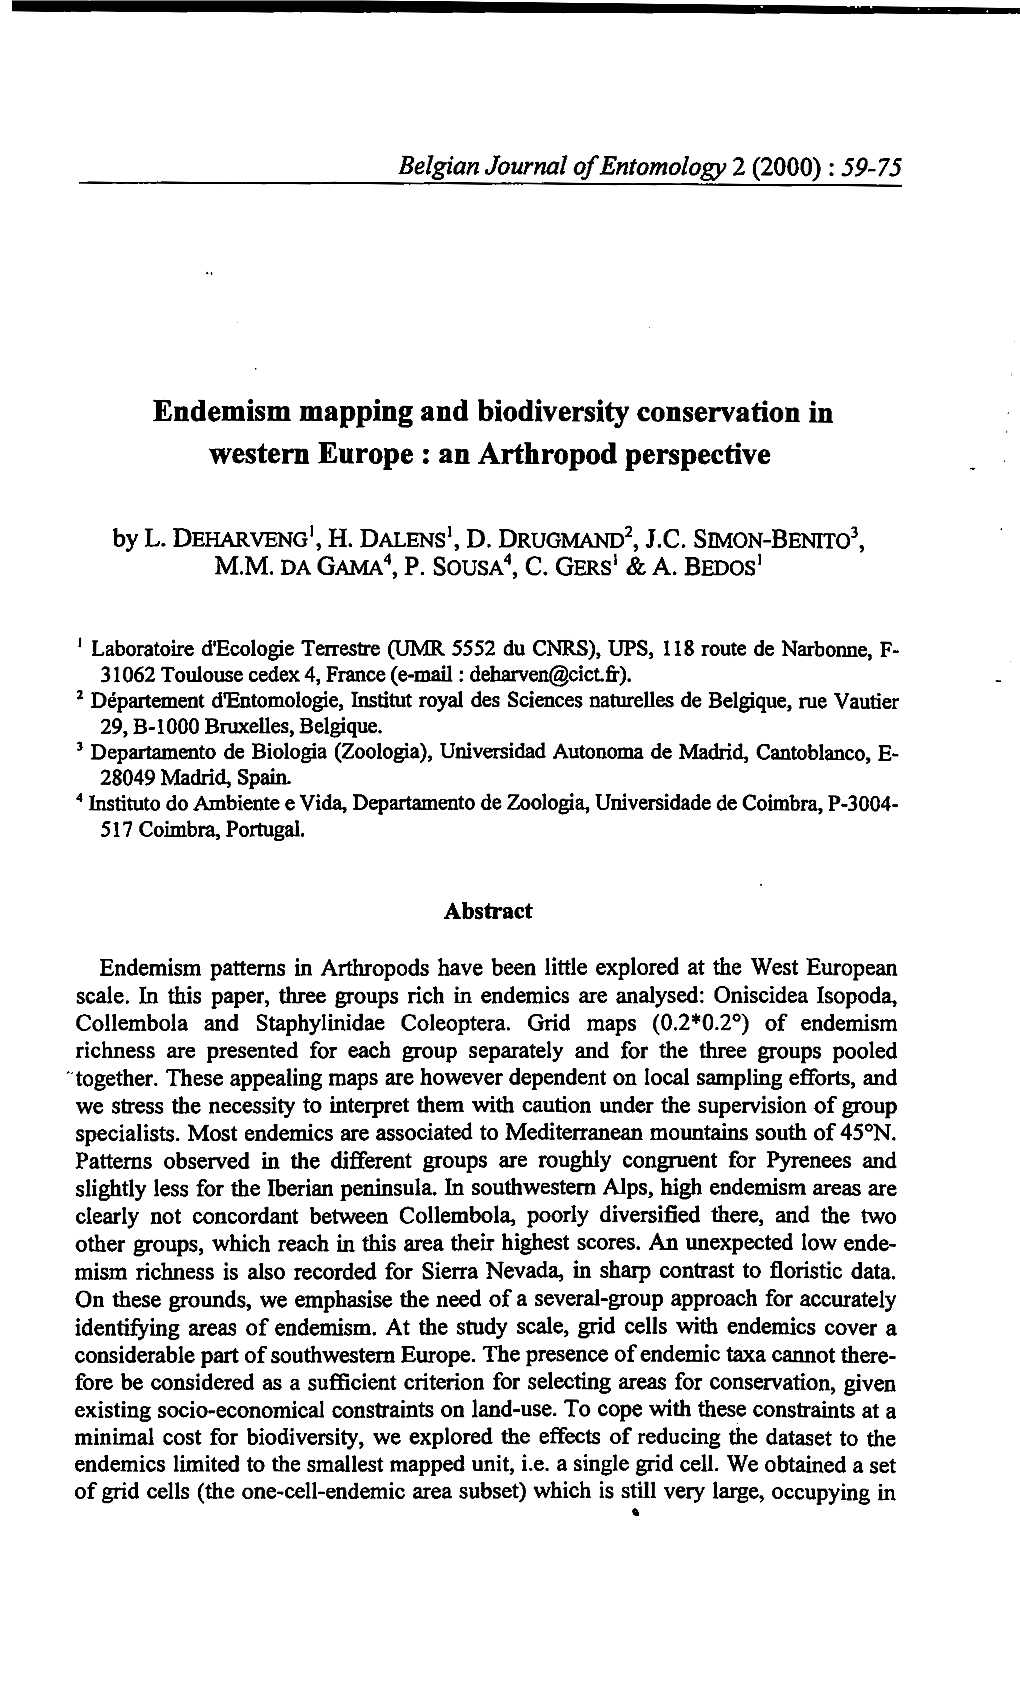 Endemism Mapping and Biodiversity Conservation in Western Europe : an Arthropod Perspective